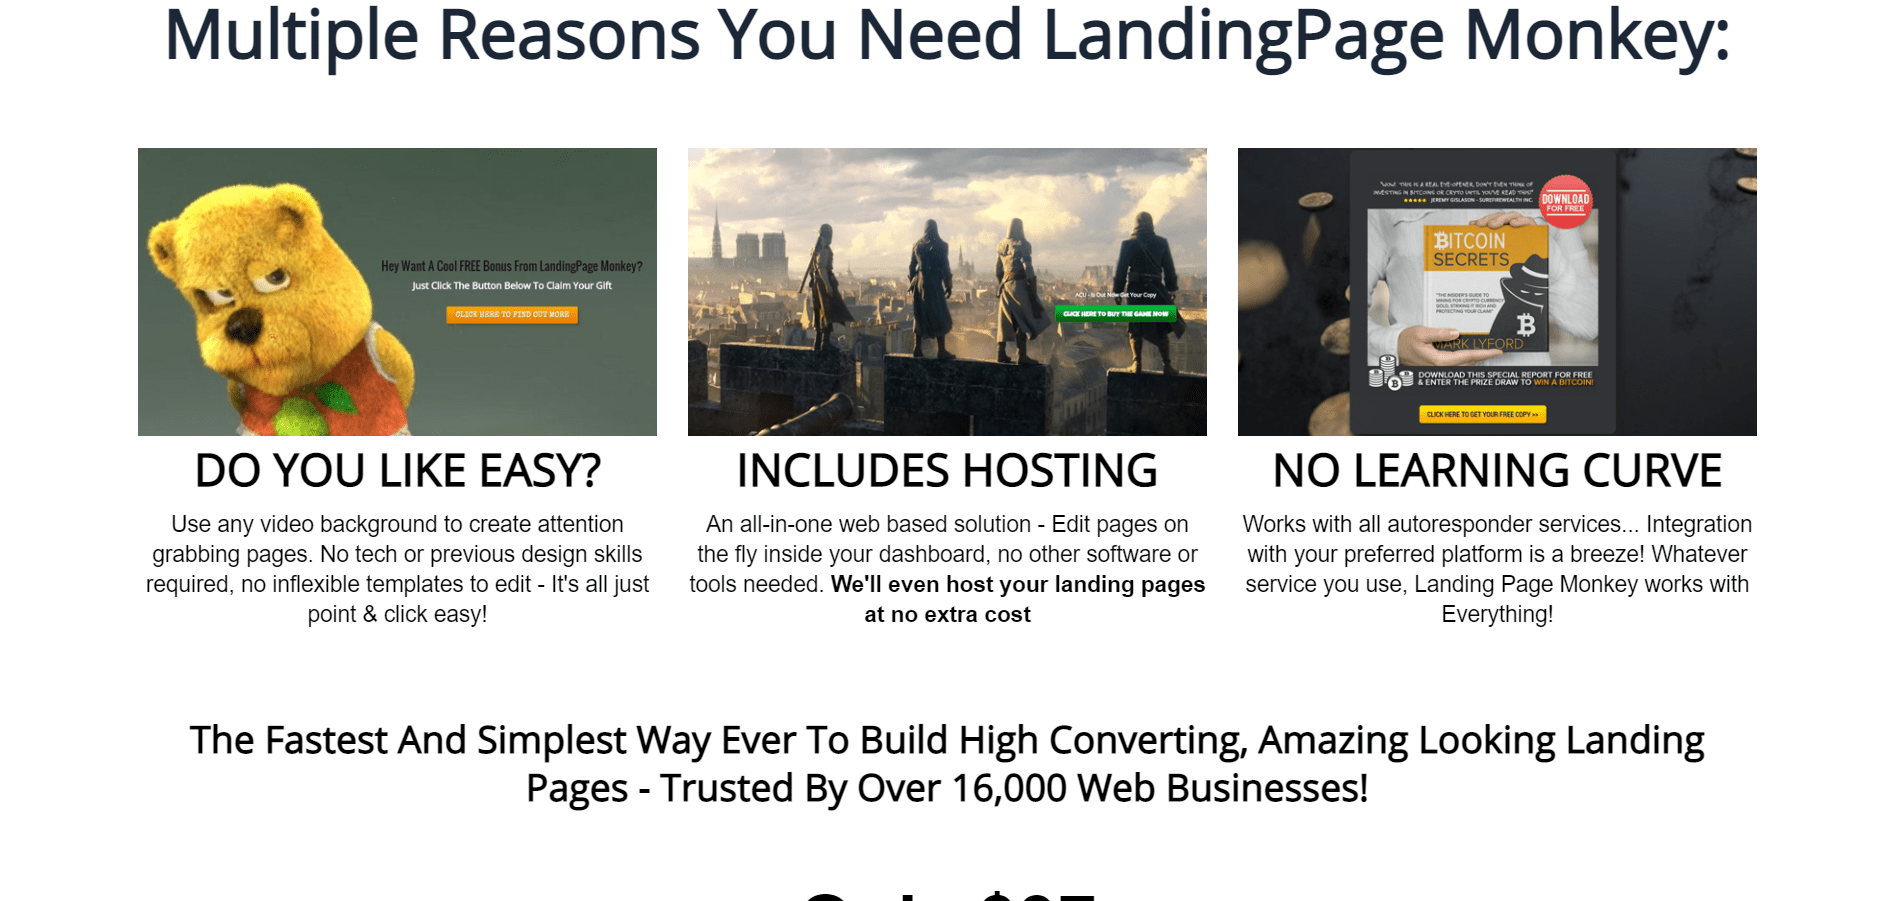 Landing Page Monkey features